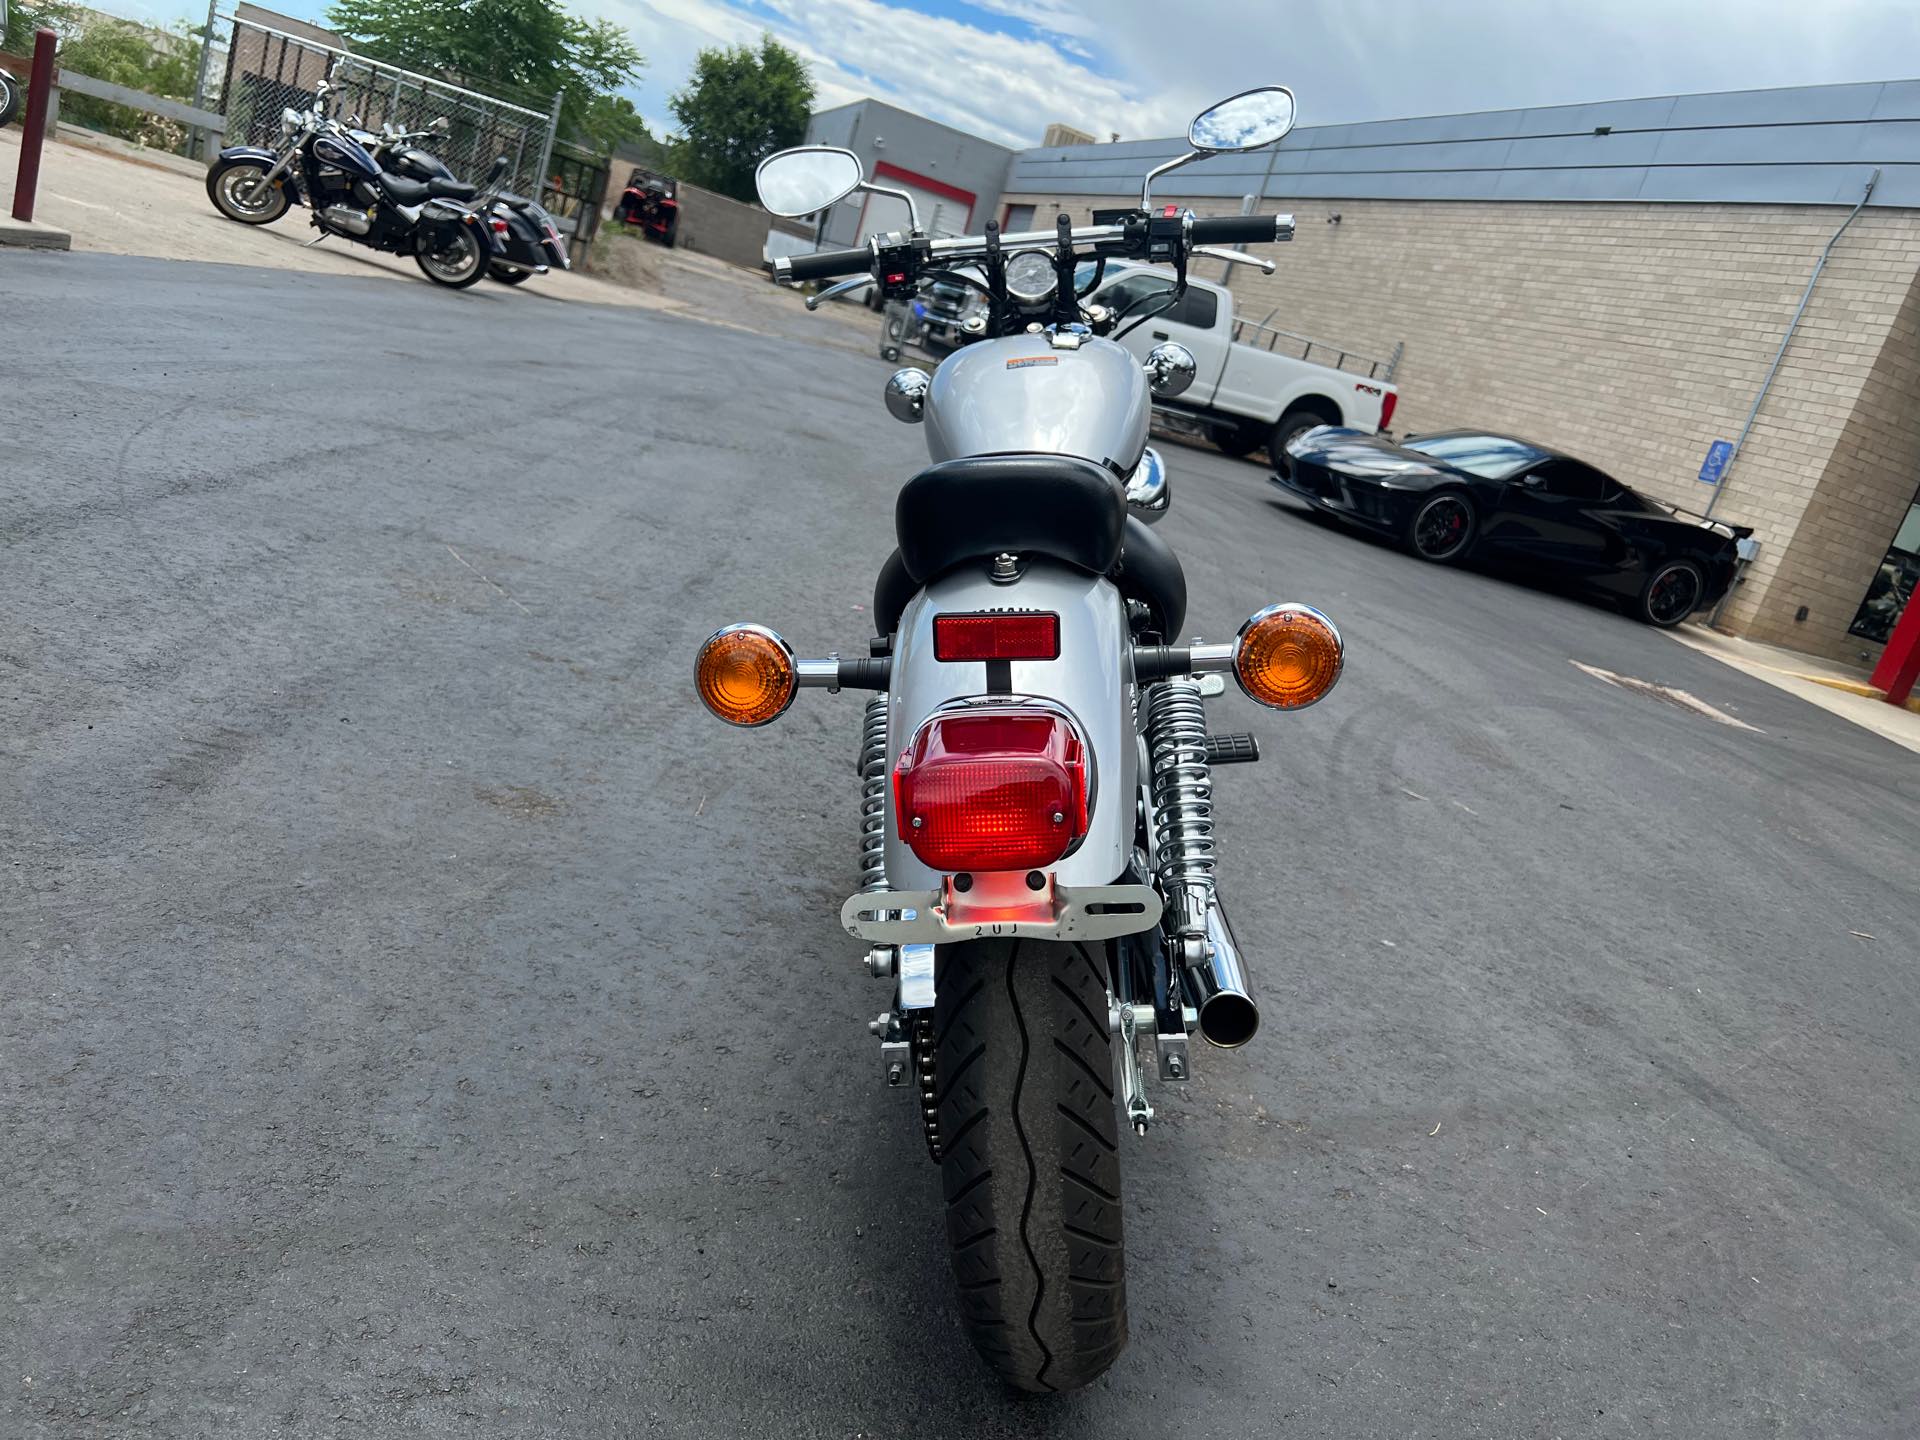 2020 Yamaha V Star 250 at Aces Motorcycles - Fort Collins